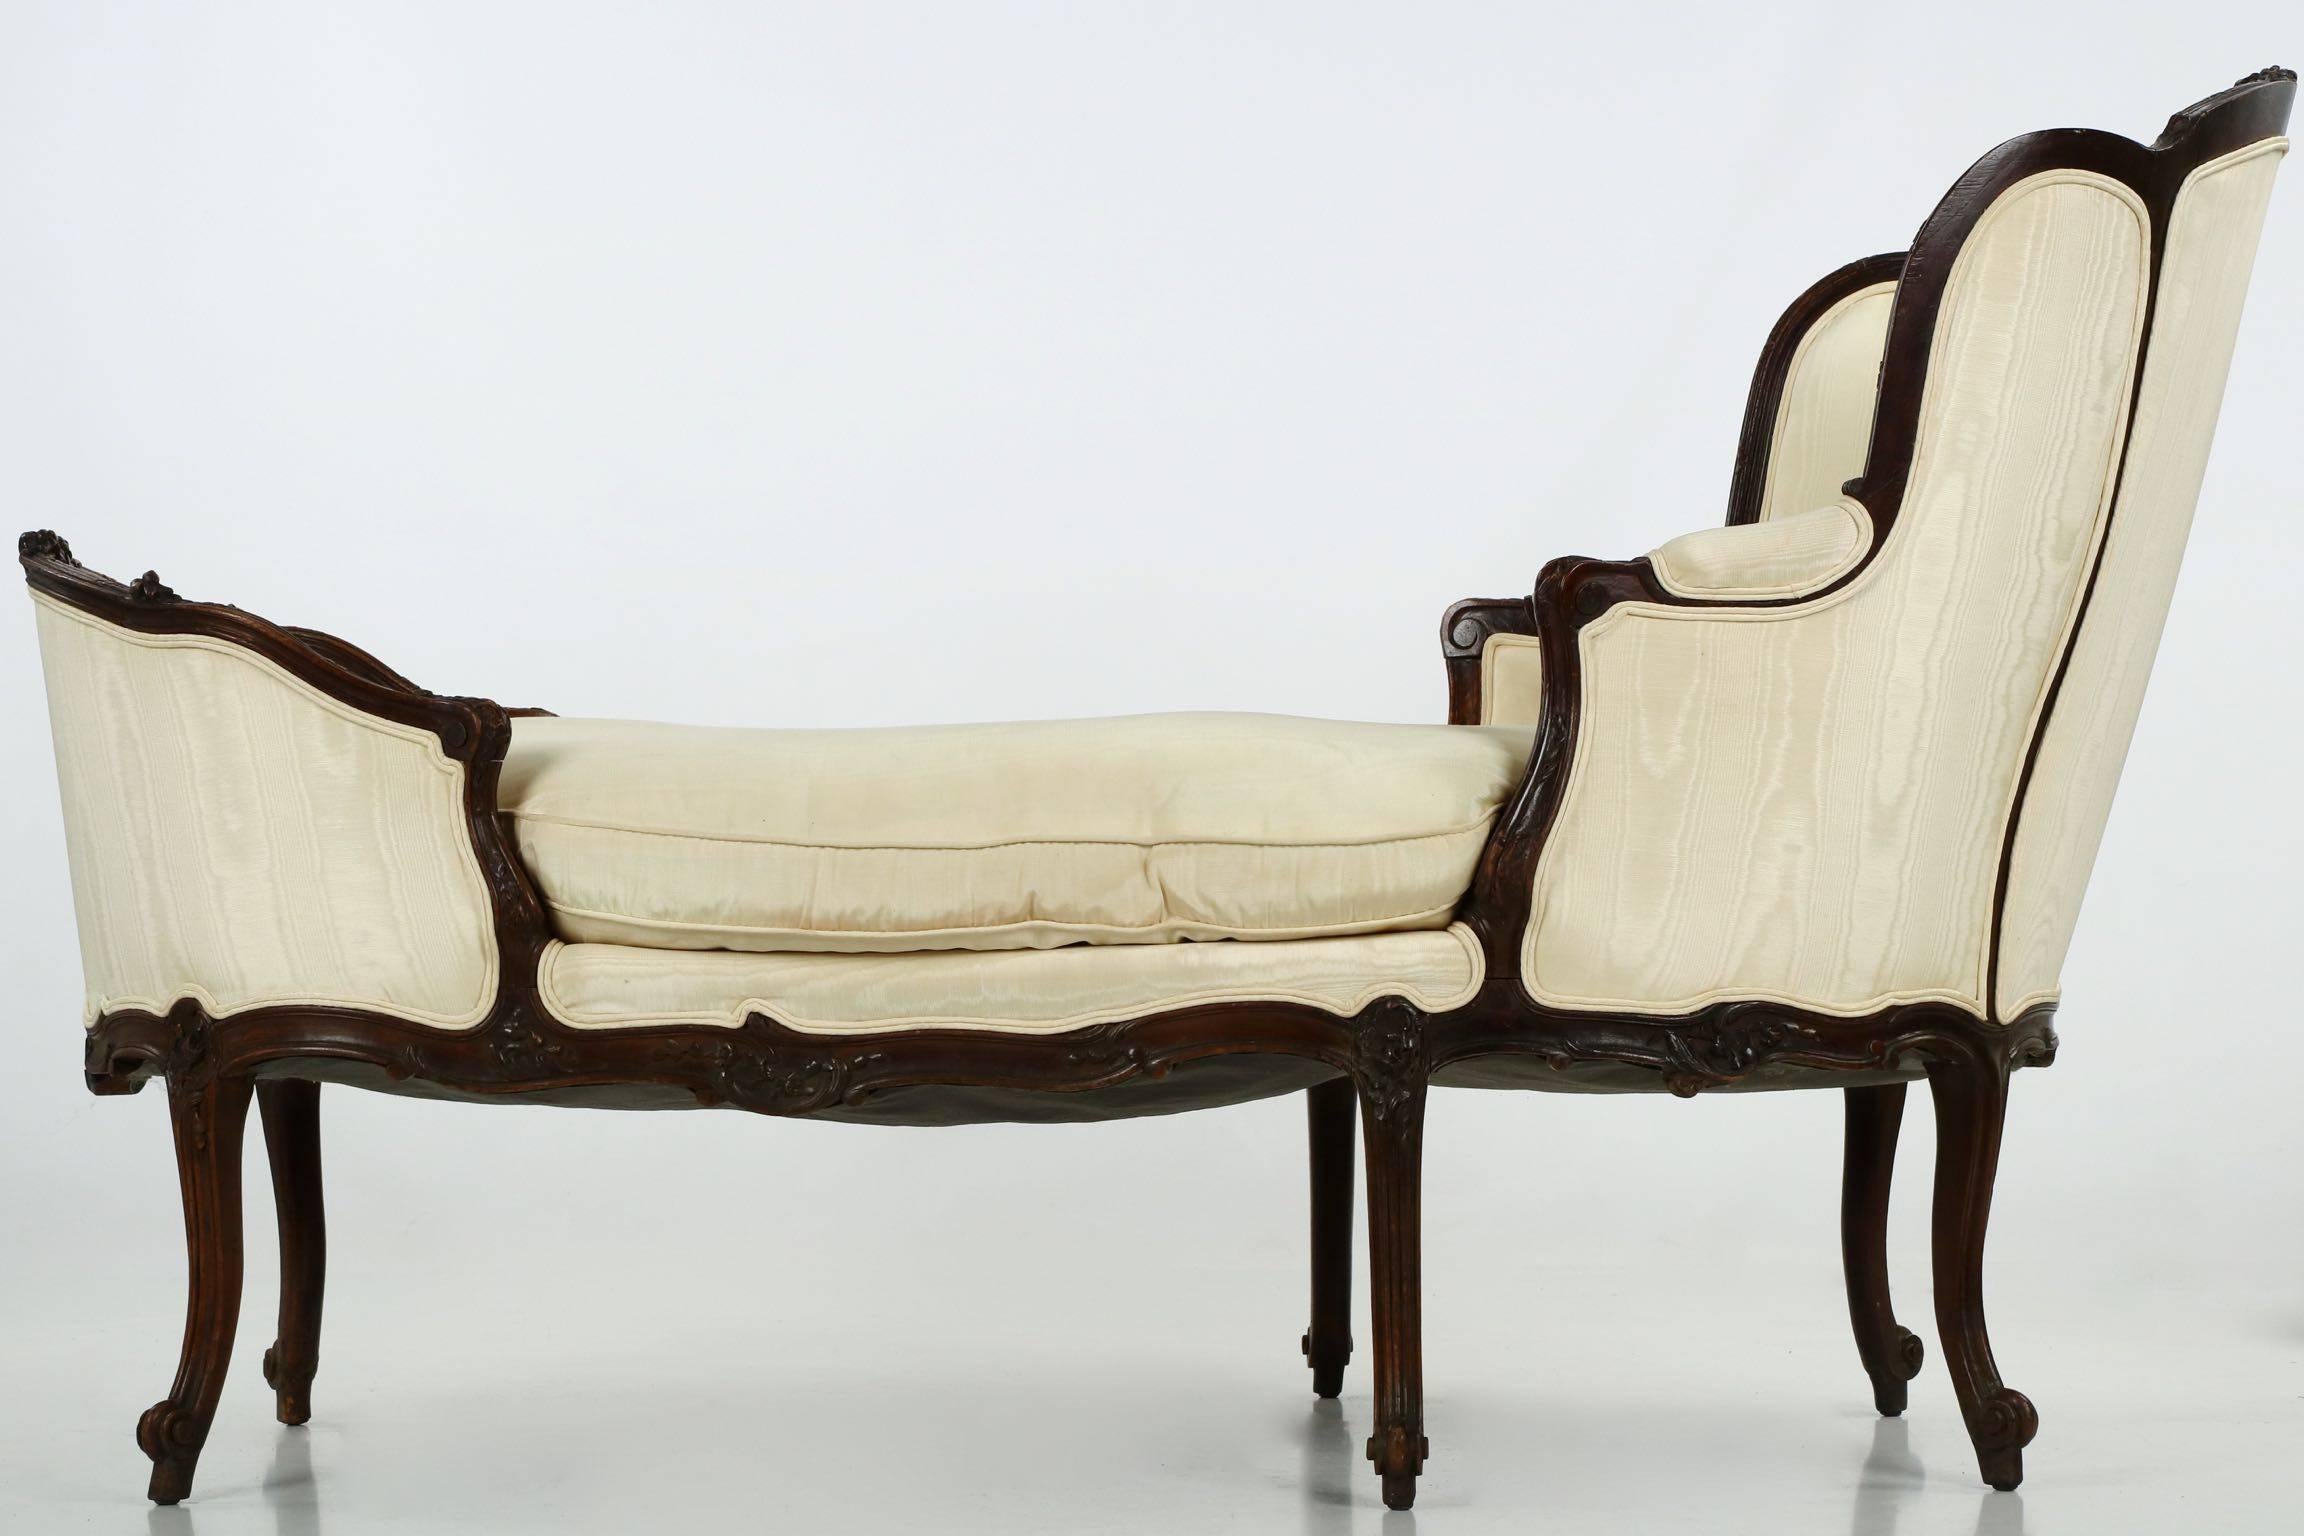 French Louis XV Style Carved Walnut Chaise Longue Lounge Settee, 19th Century 1